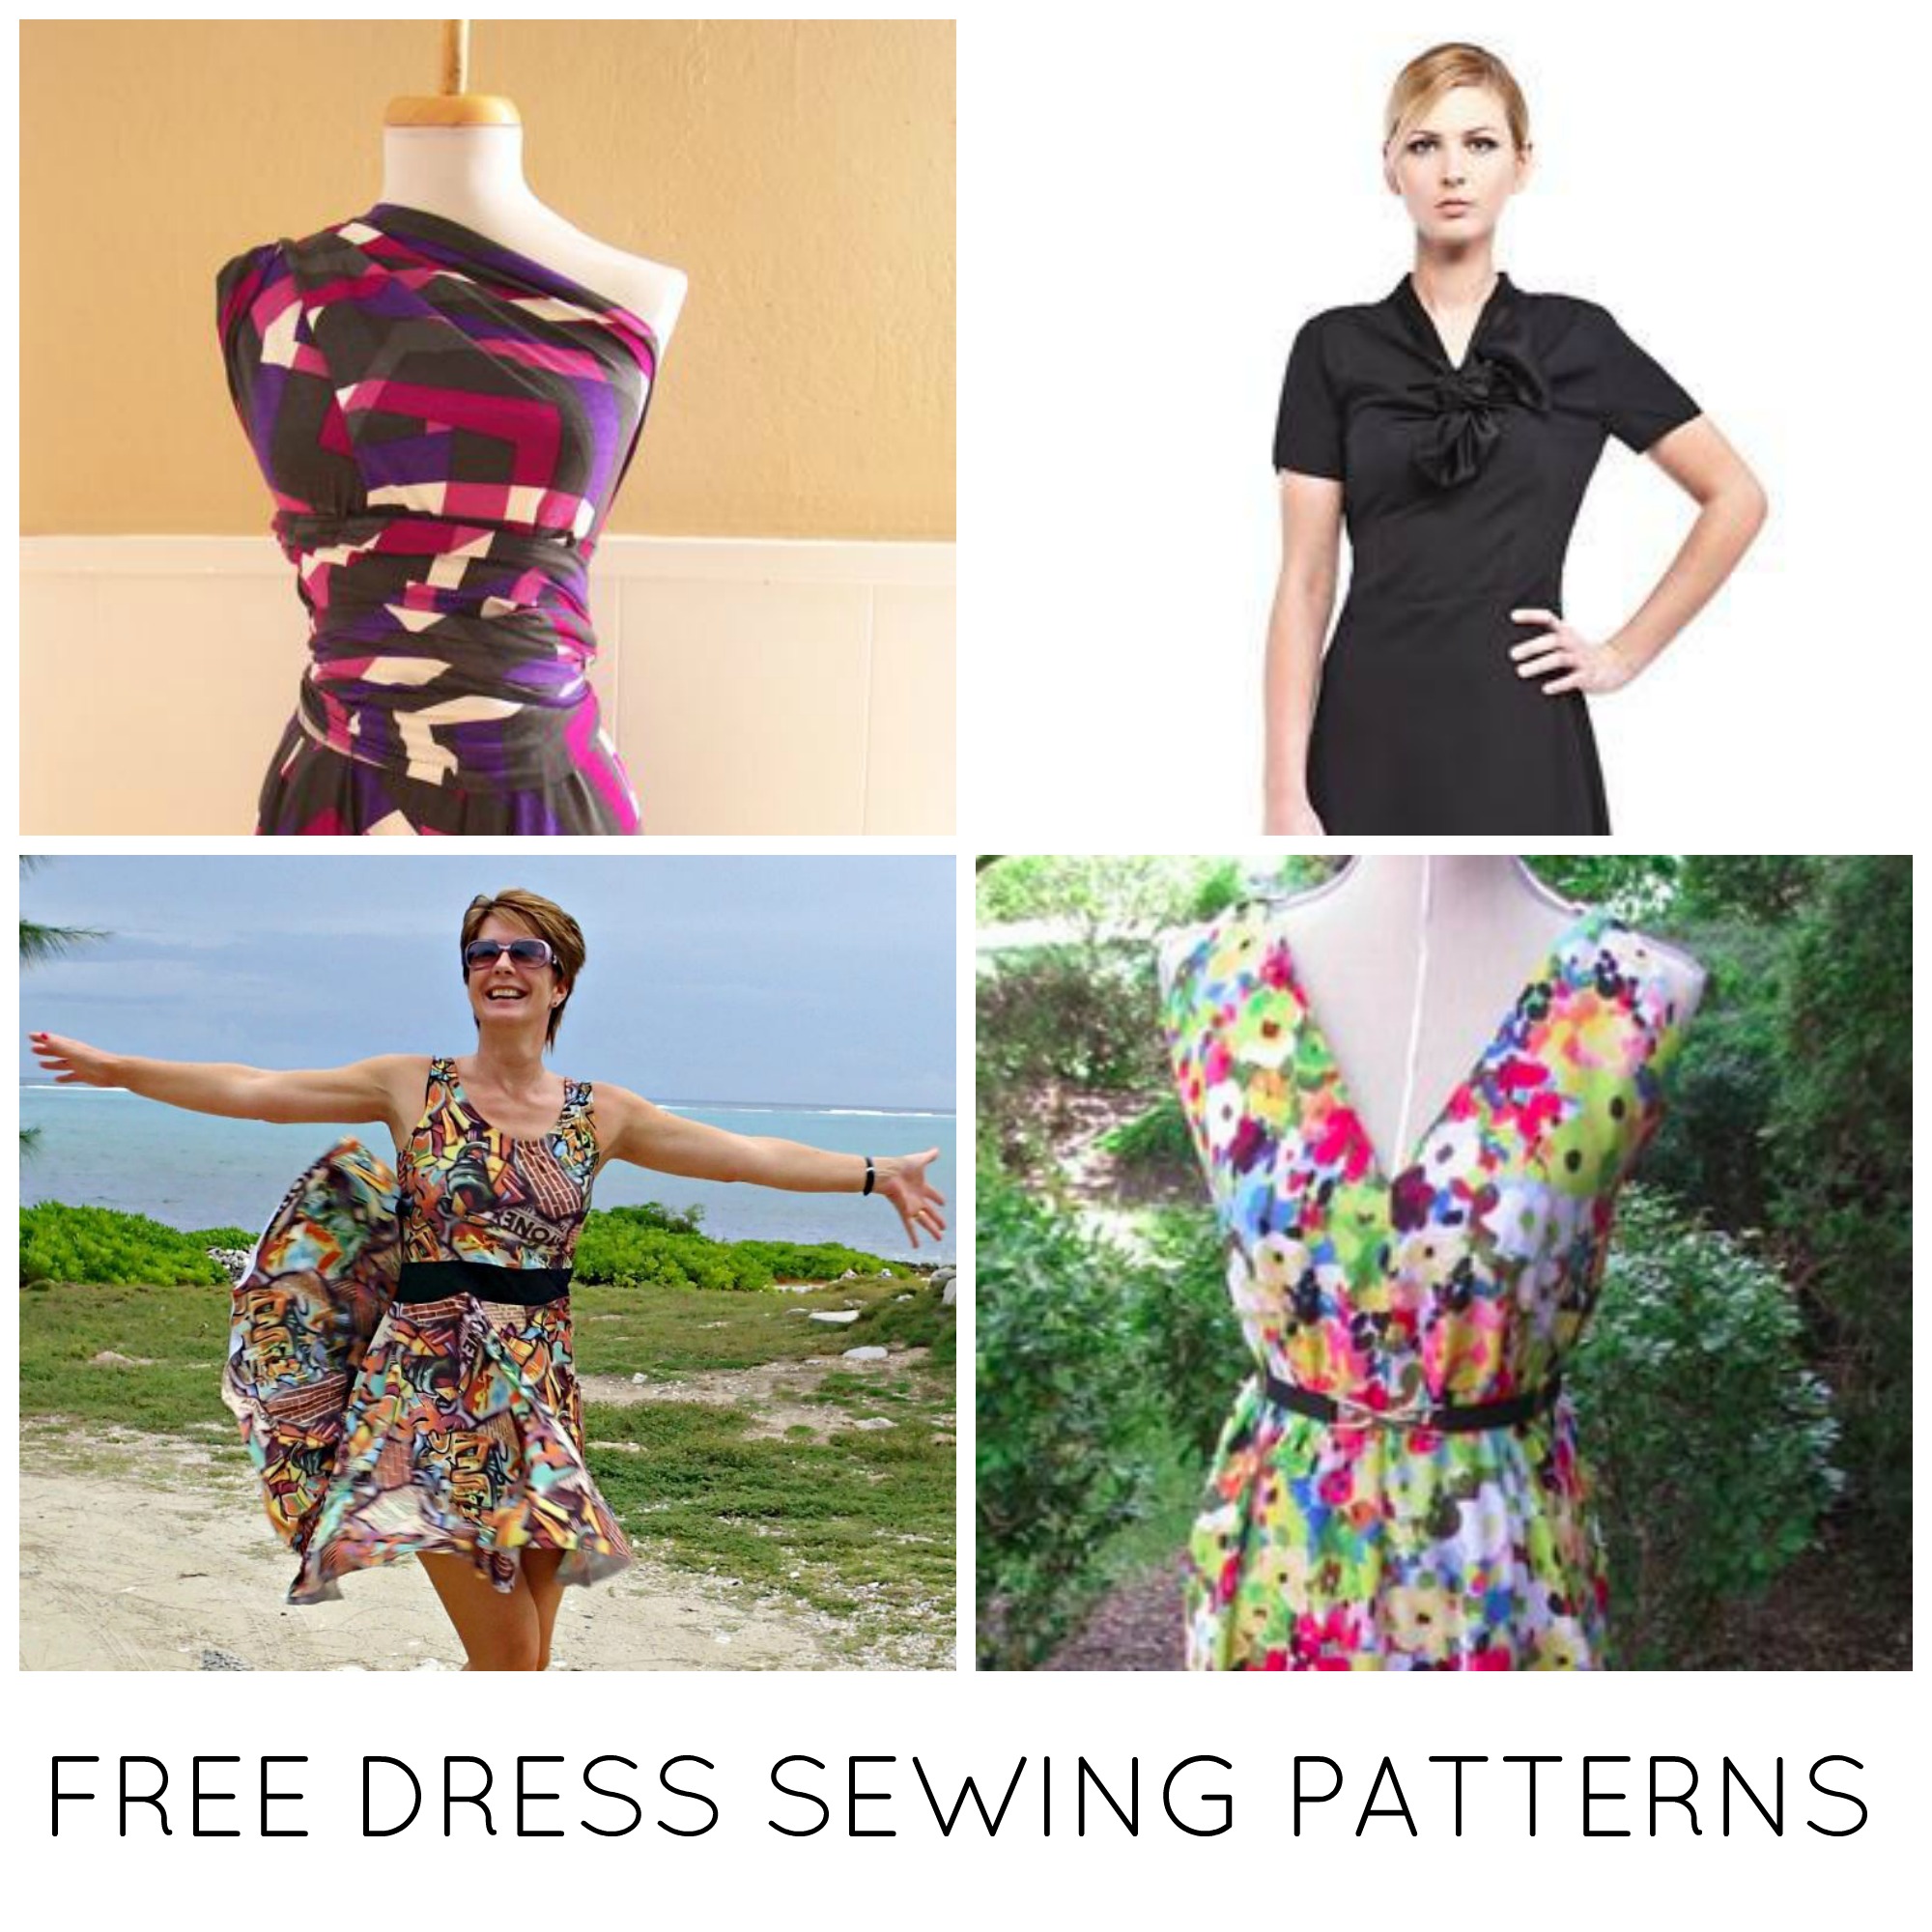 Sewing Patterns for Beginners